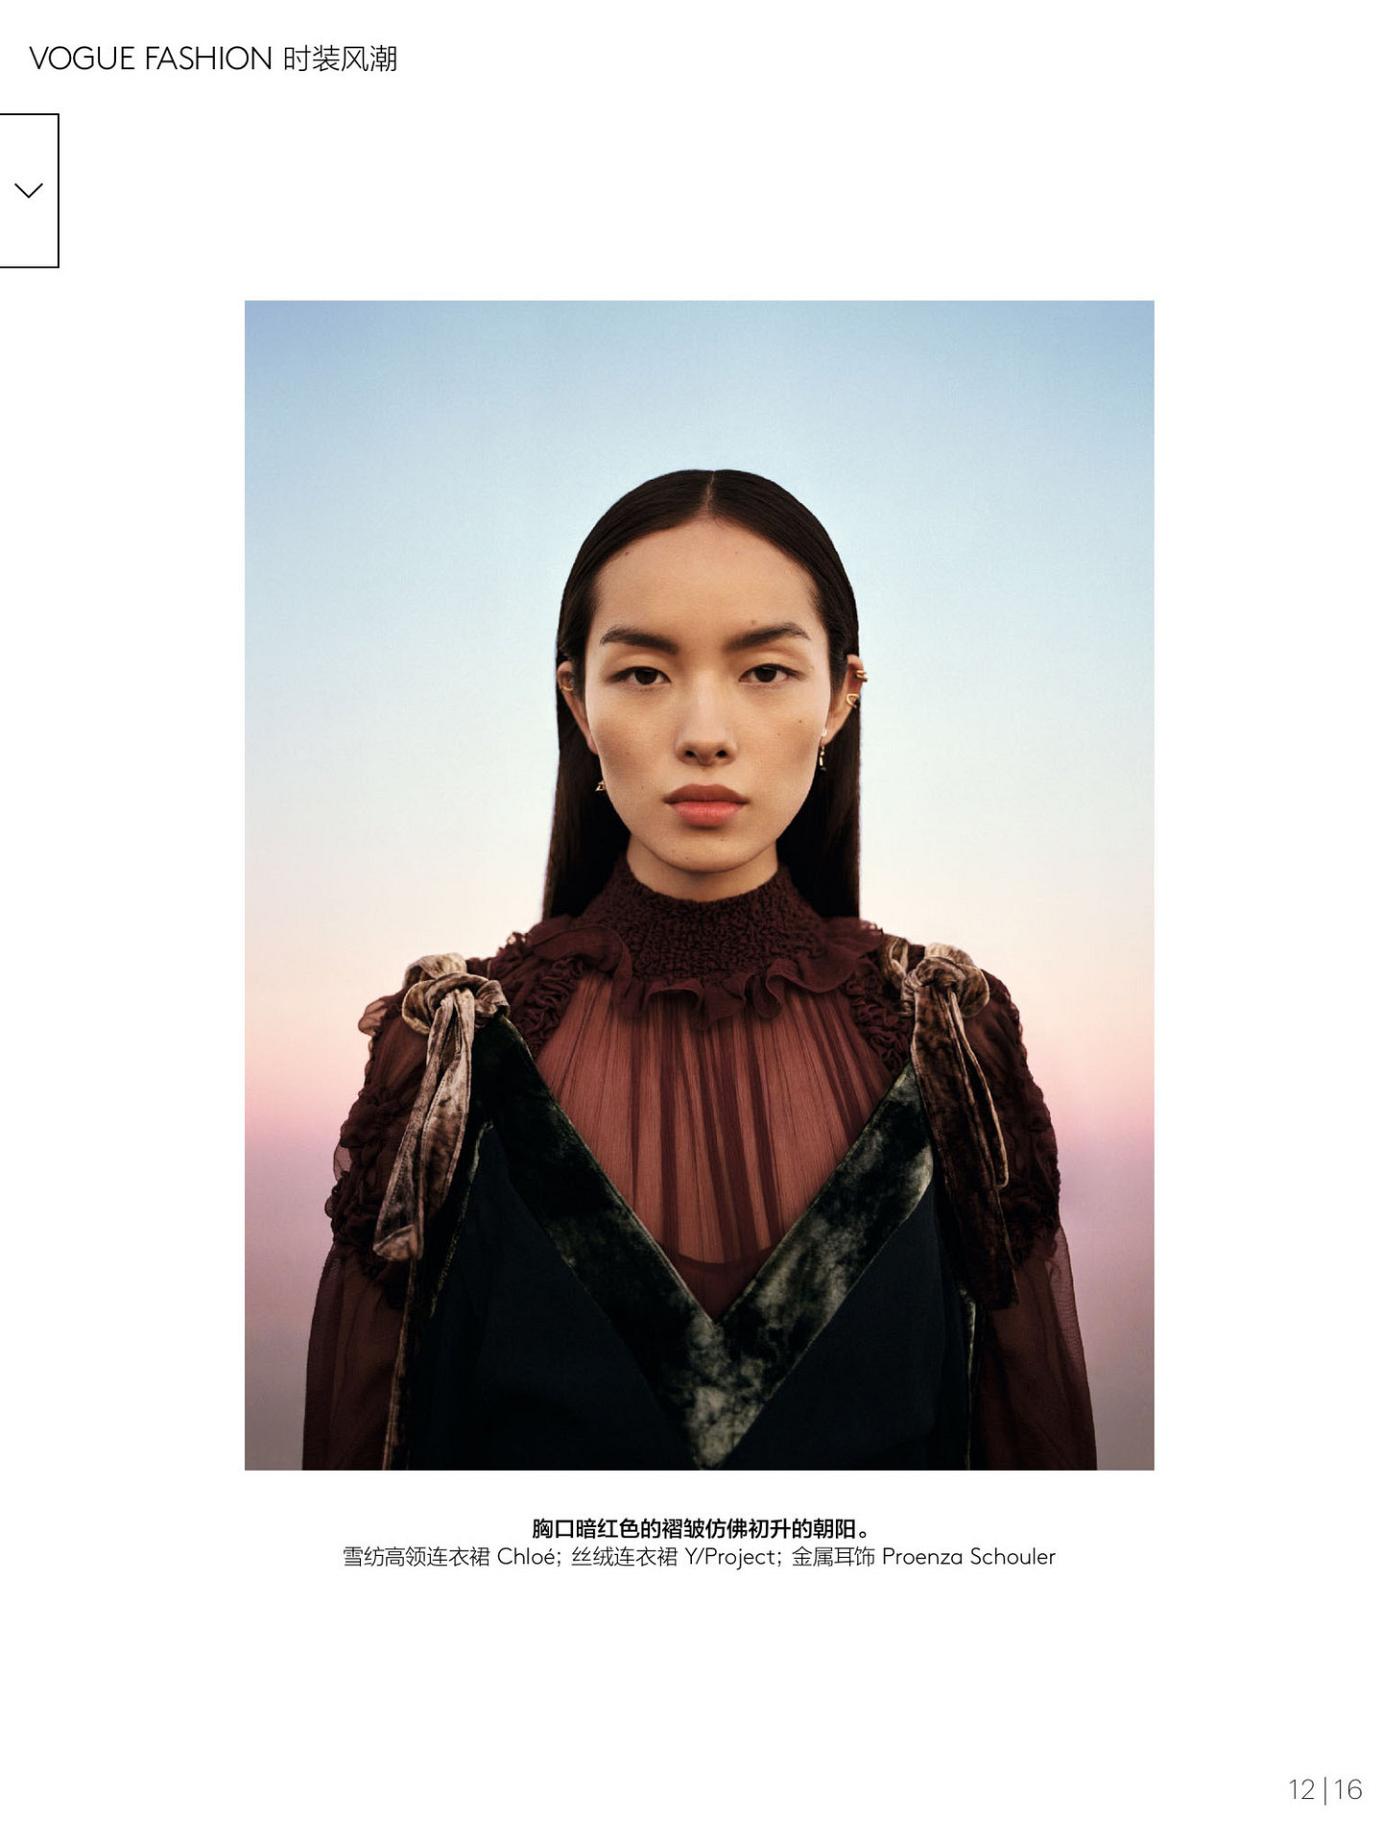 CoqCreative power by ProductionLink s.r.l. Vogue-China-Ete Vogue-China-Ete  Vogue-China-Ete